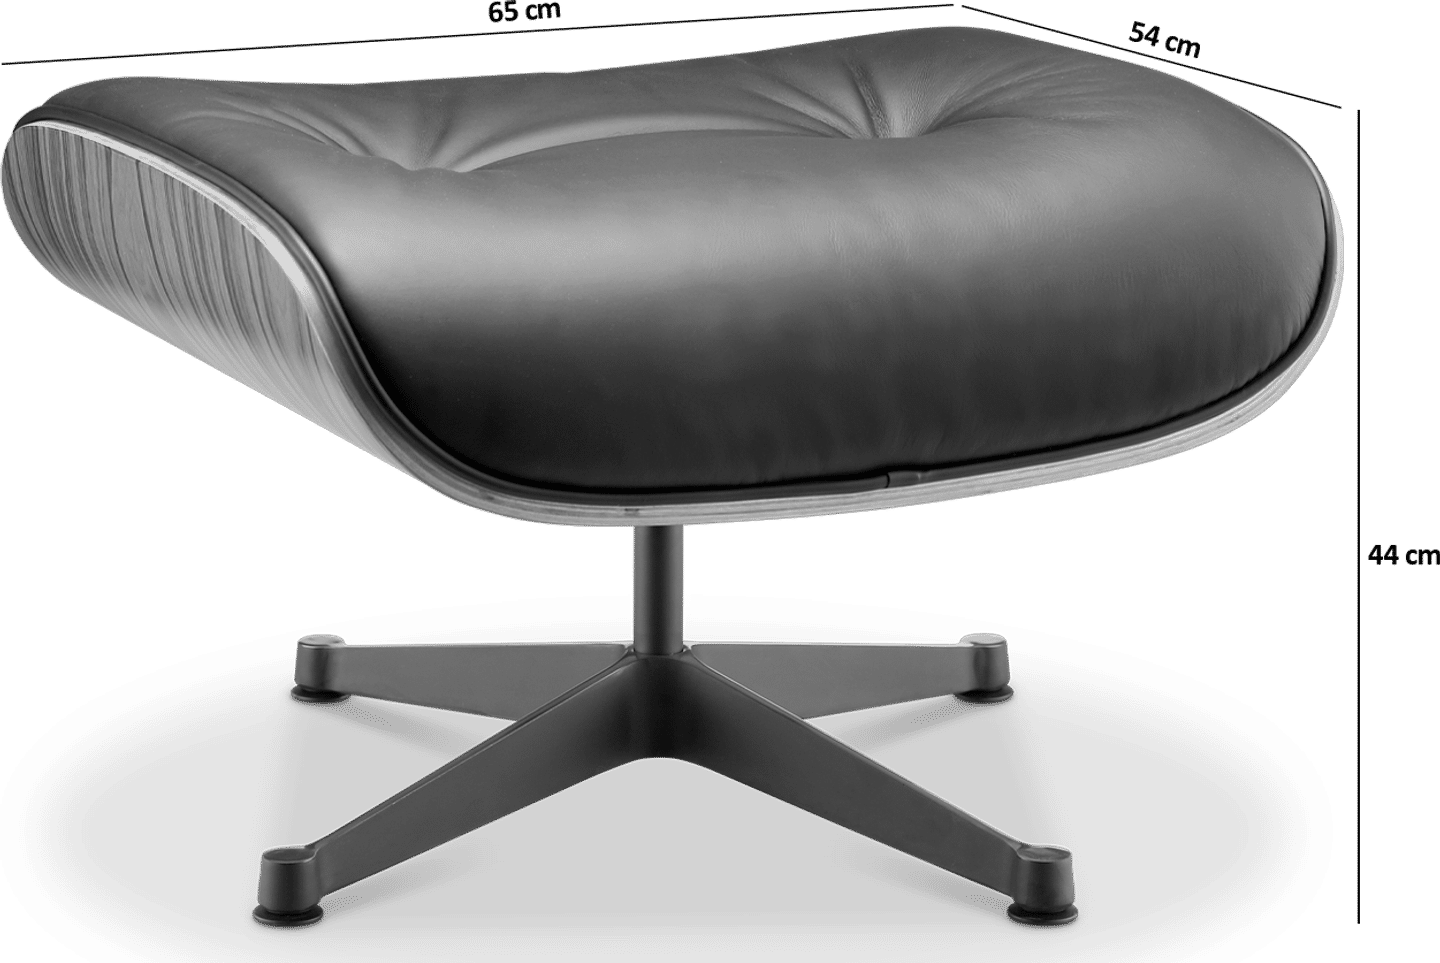 Chaise longue style Eames 670 Tabouret Italian Leather/Black/Rosewood image.